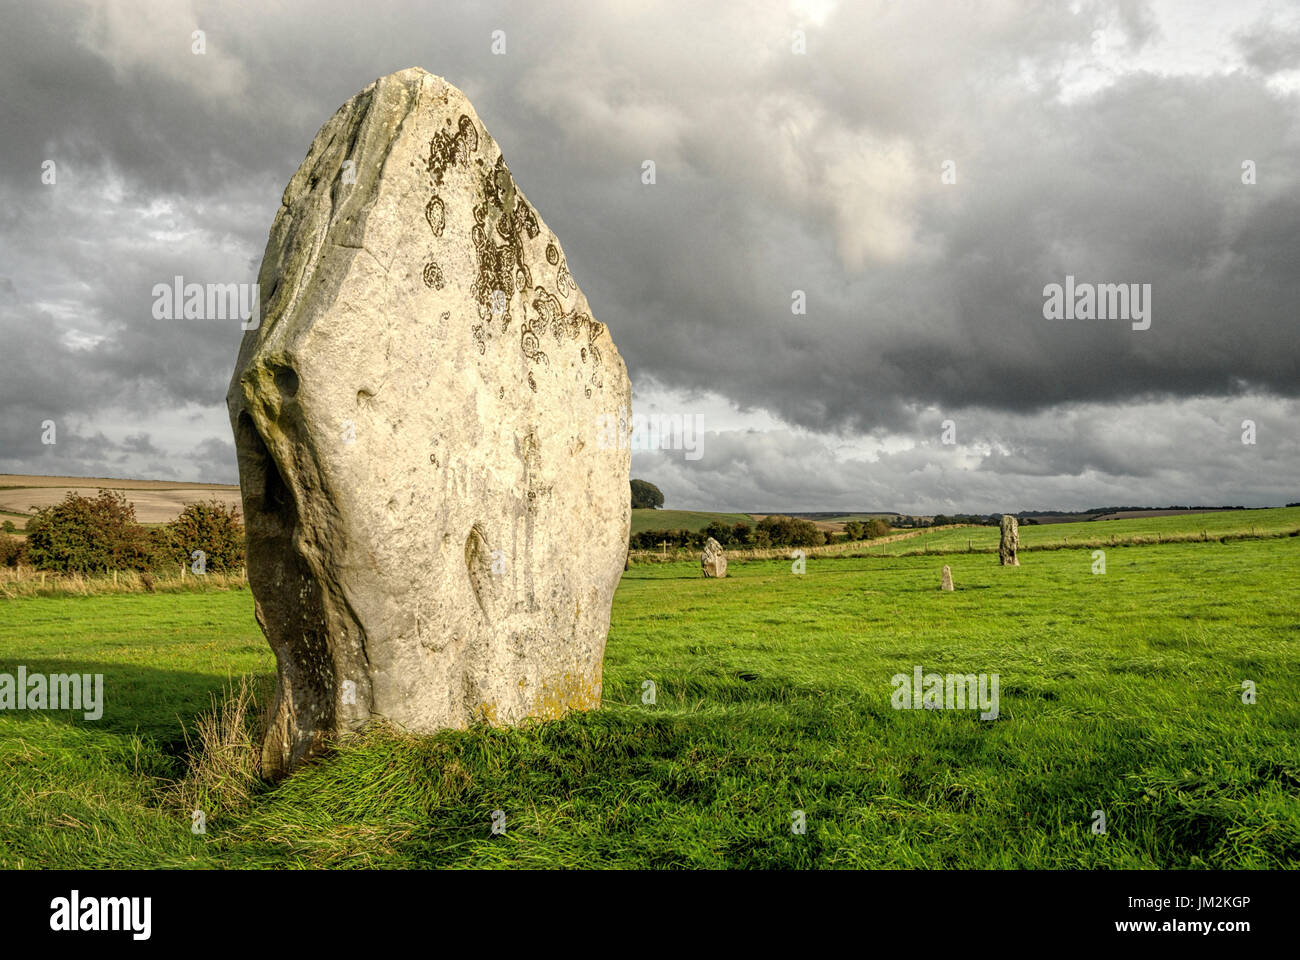 Monolithic Standing stone forming part of an ancient processional avenue  leading to and from Avebury stone circle in Wiltshire, England. Stock Photo